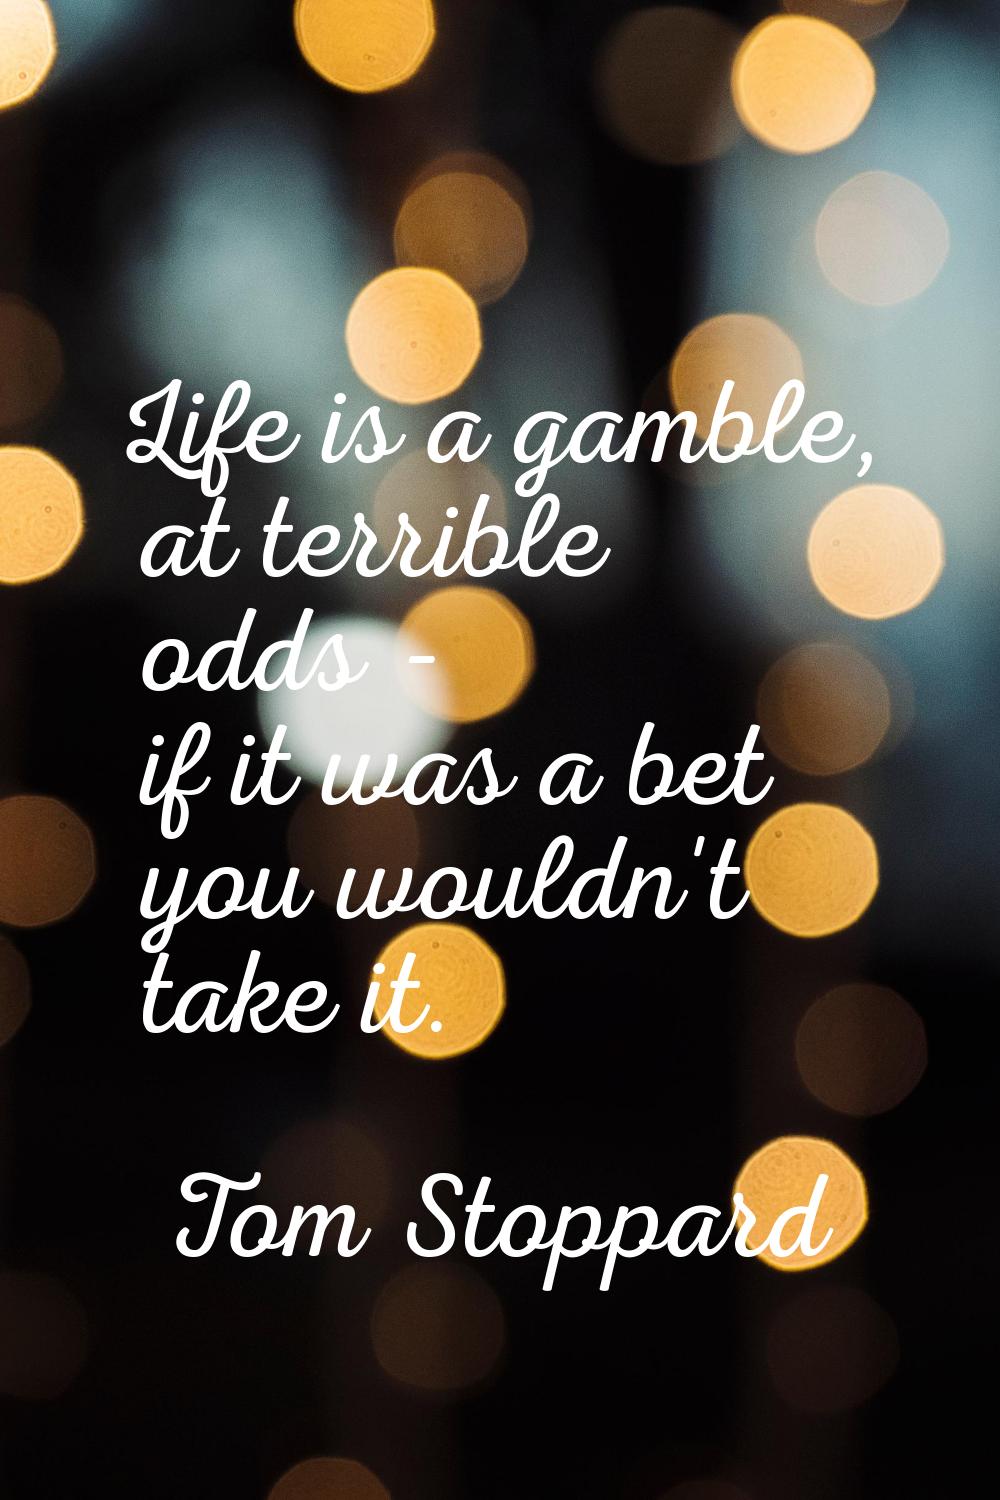 Life is a gamble, at terrible odds - if it was a bet you wouldn't take it.